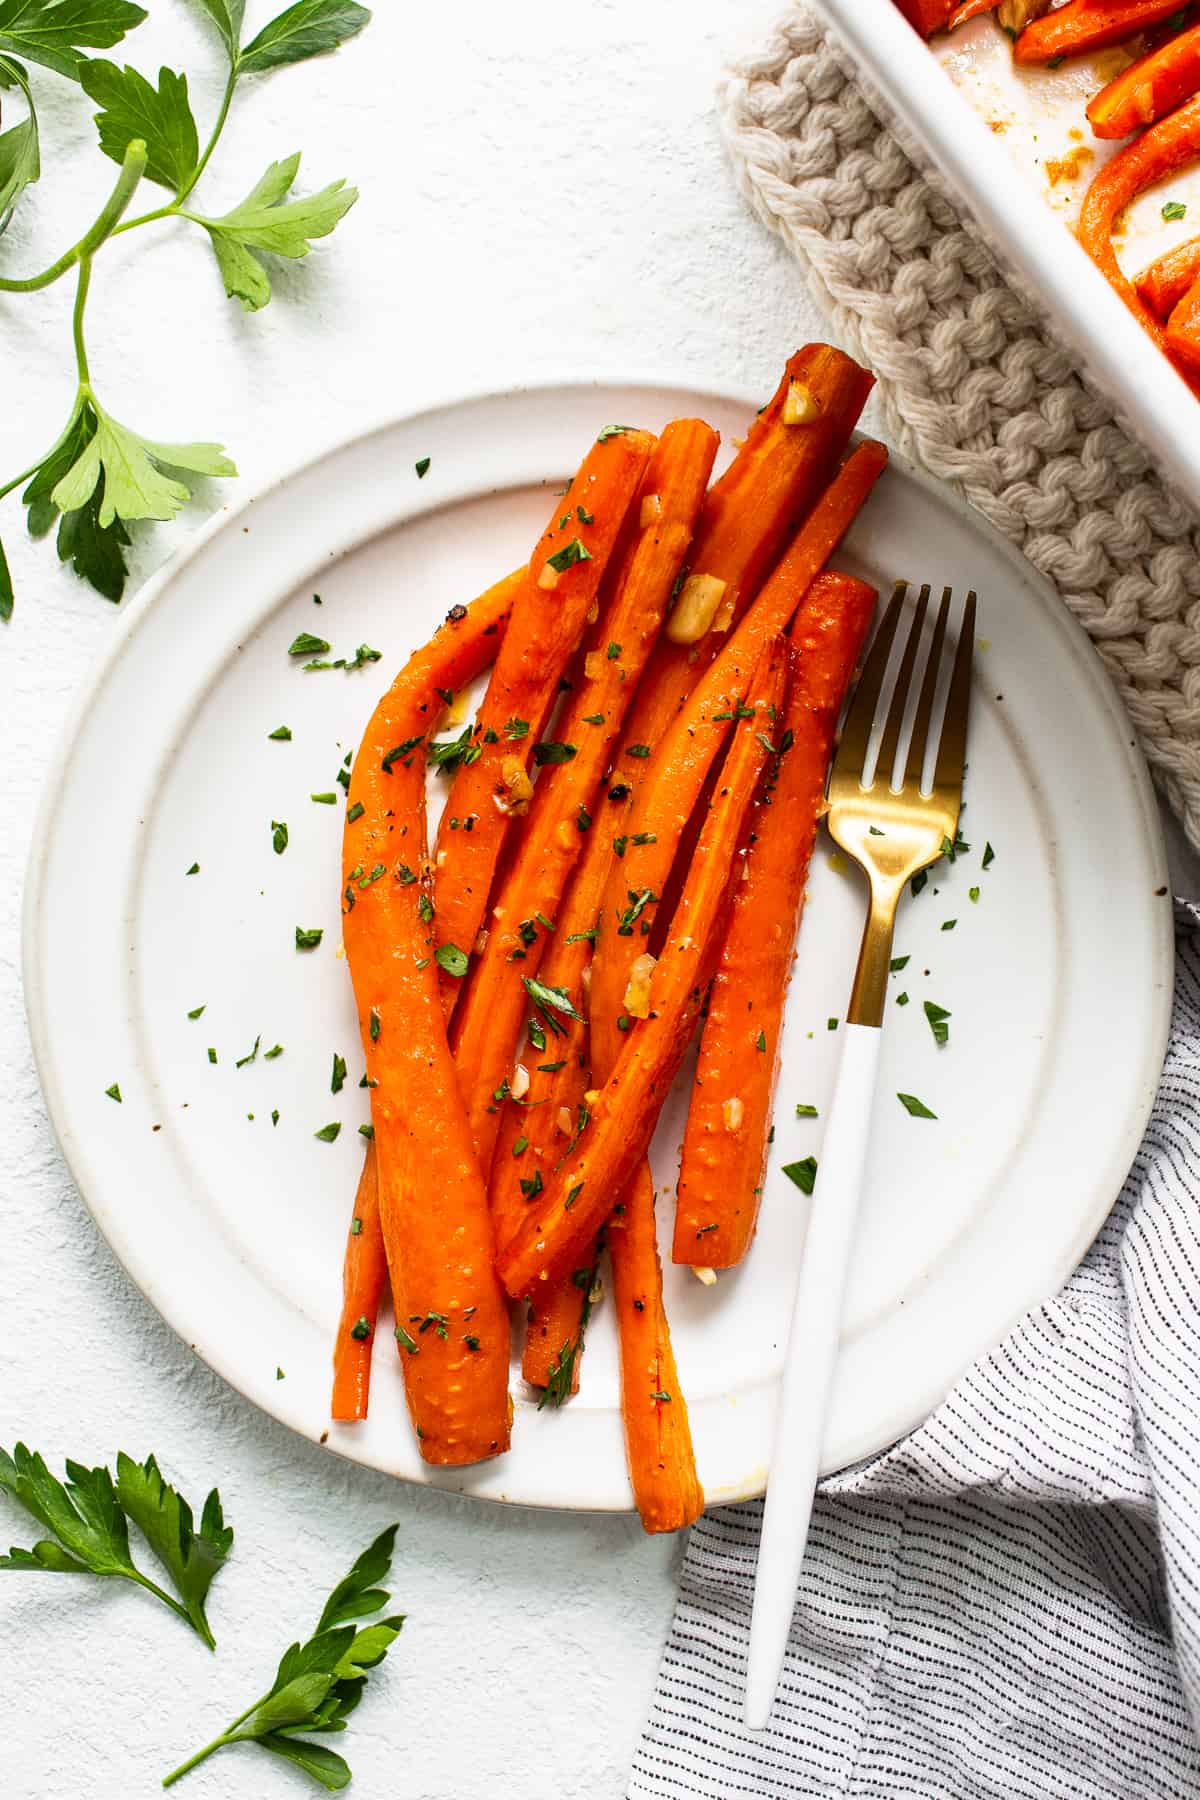 Garlic glazed carrots on a plate with a fork.